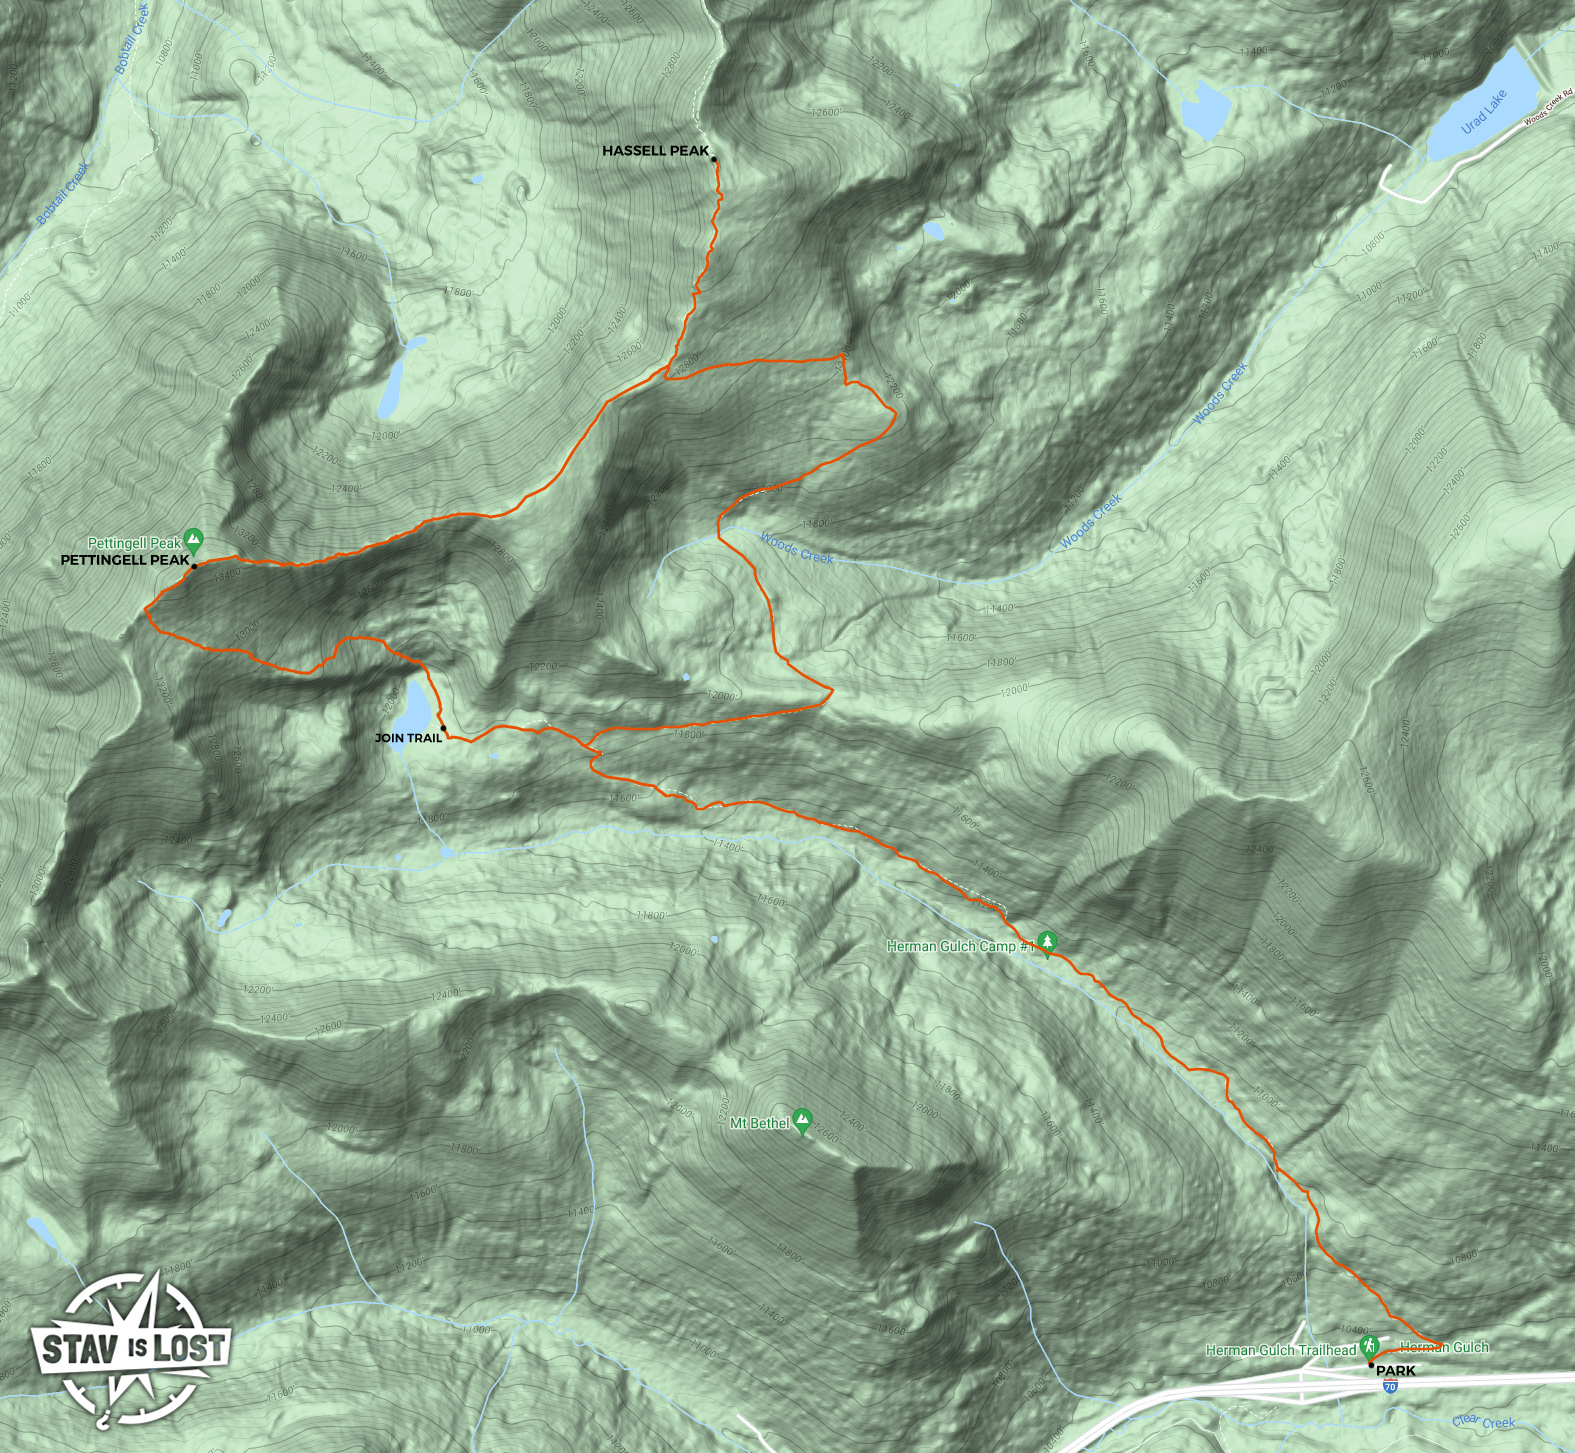 map for Hassell Peak and Pettingell Peak by stav is lost